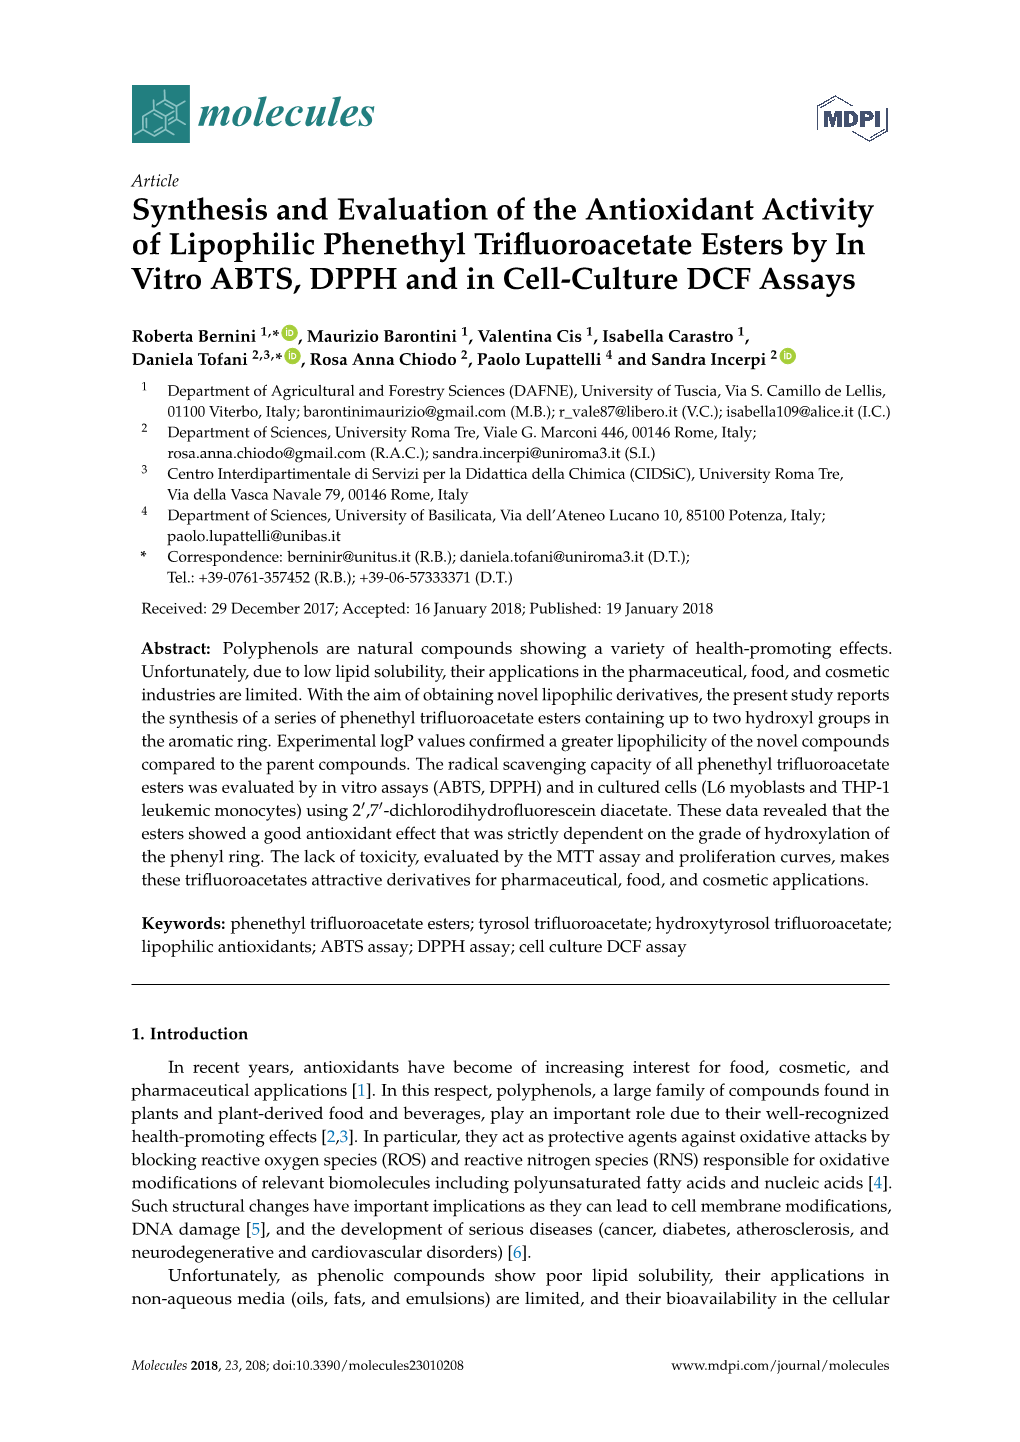 Synthesis and Evaluation of the Antioxidant Activity of Lipophilic Phenethyl Triﬂuoroacetate Esters by in Vitro ABTS, DPPH and in Cell-Culture DCF Assays